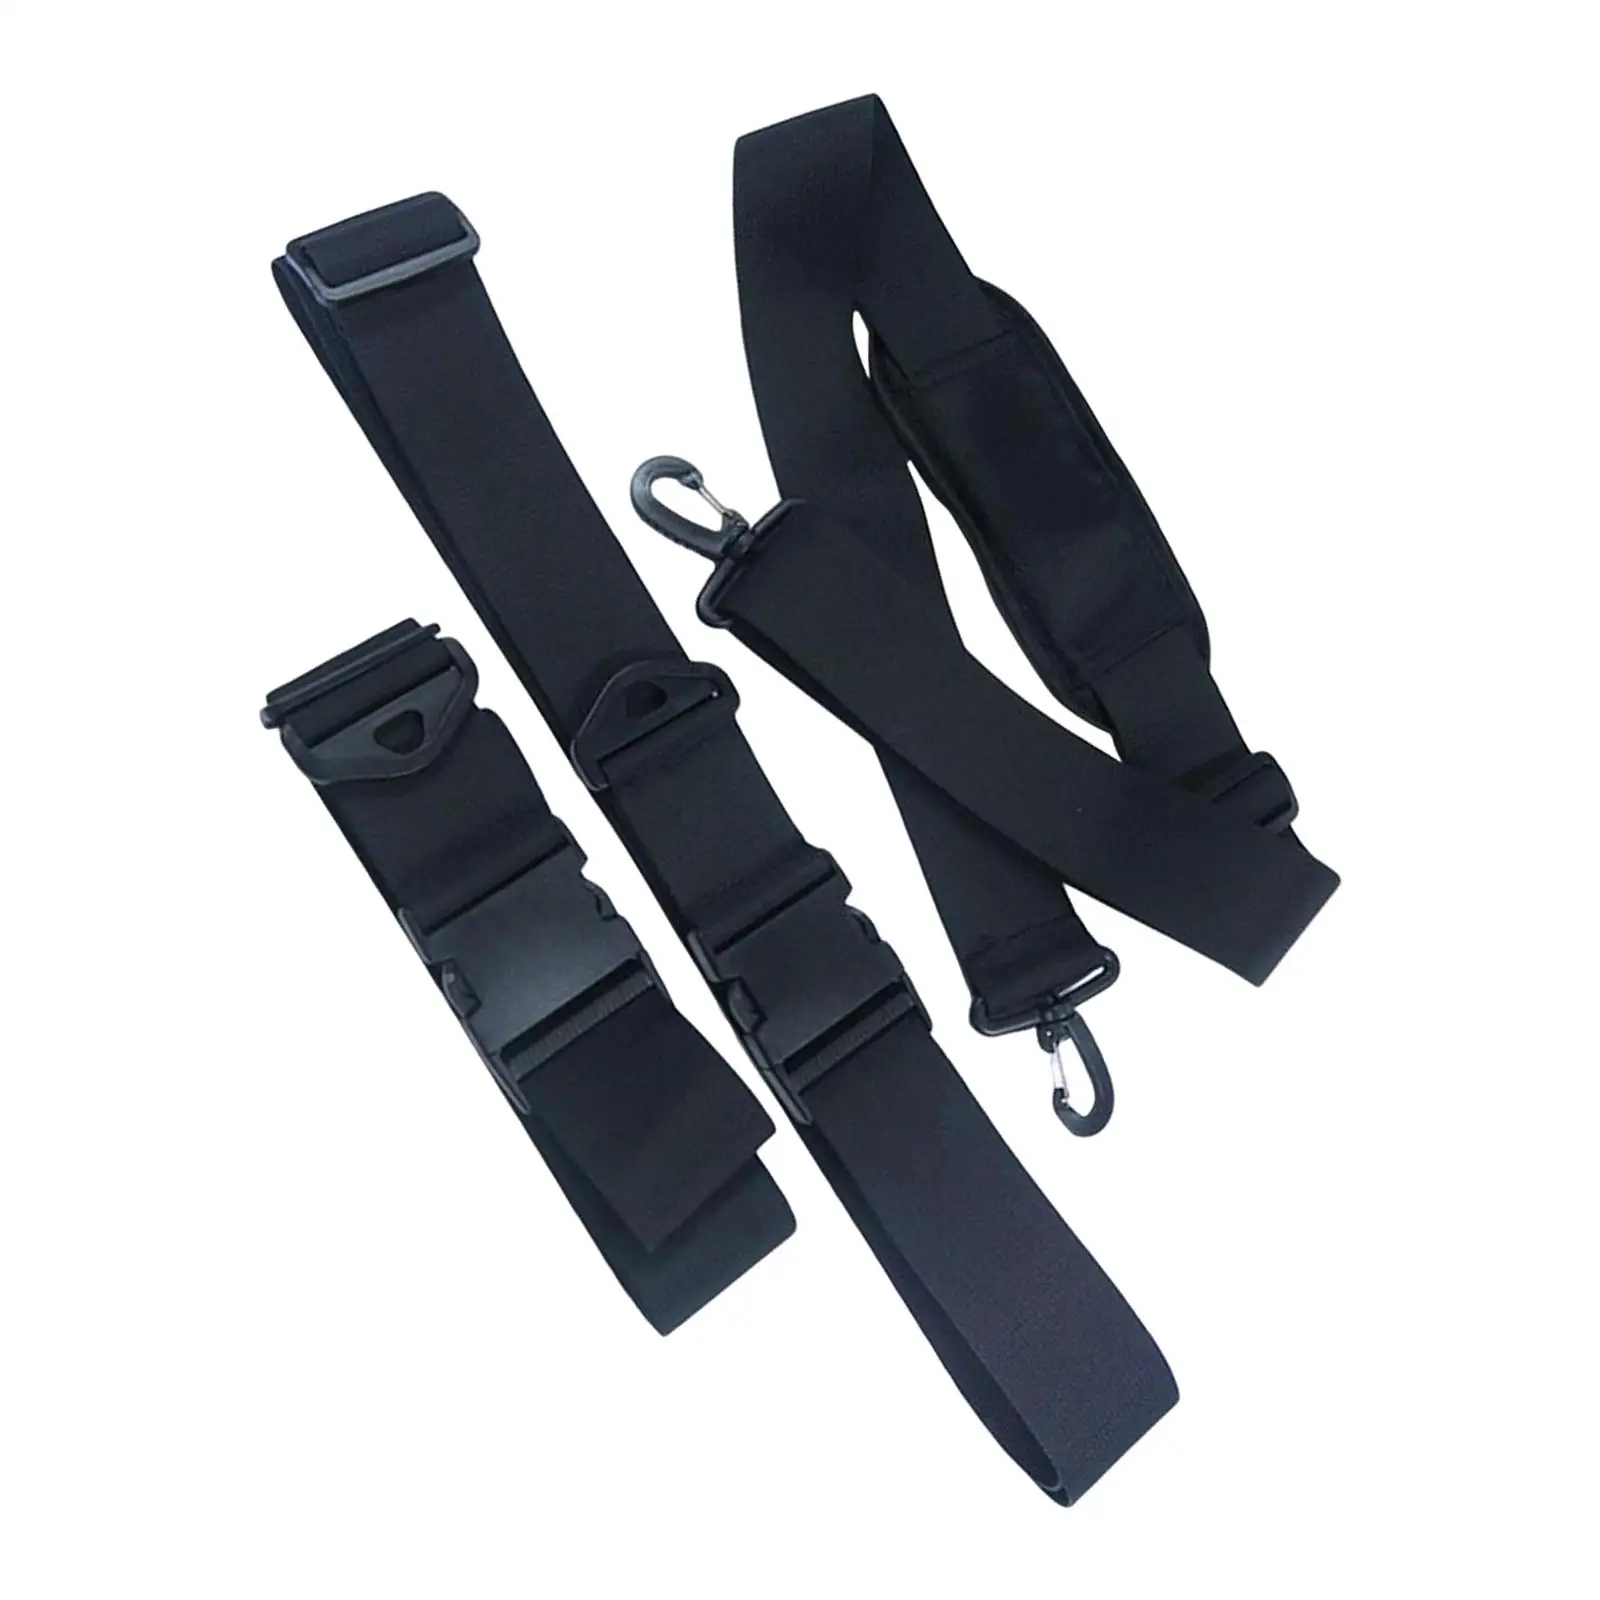 Carrying Sling Carrier Paddle Board Accessories Carry Belt Paddle Board Shoulder Strap for Canoe Surfing Women Men Paddleboard